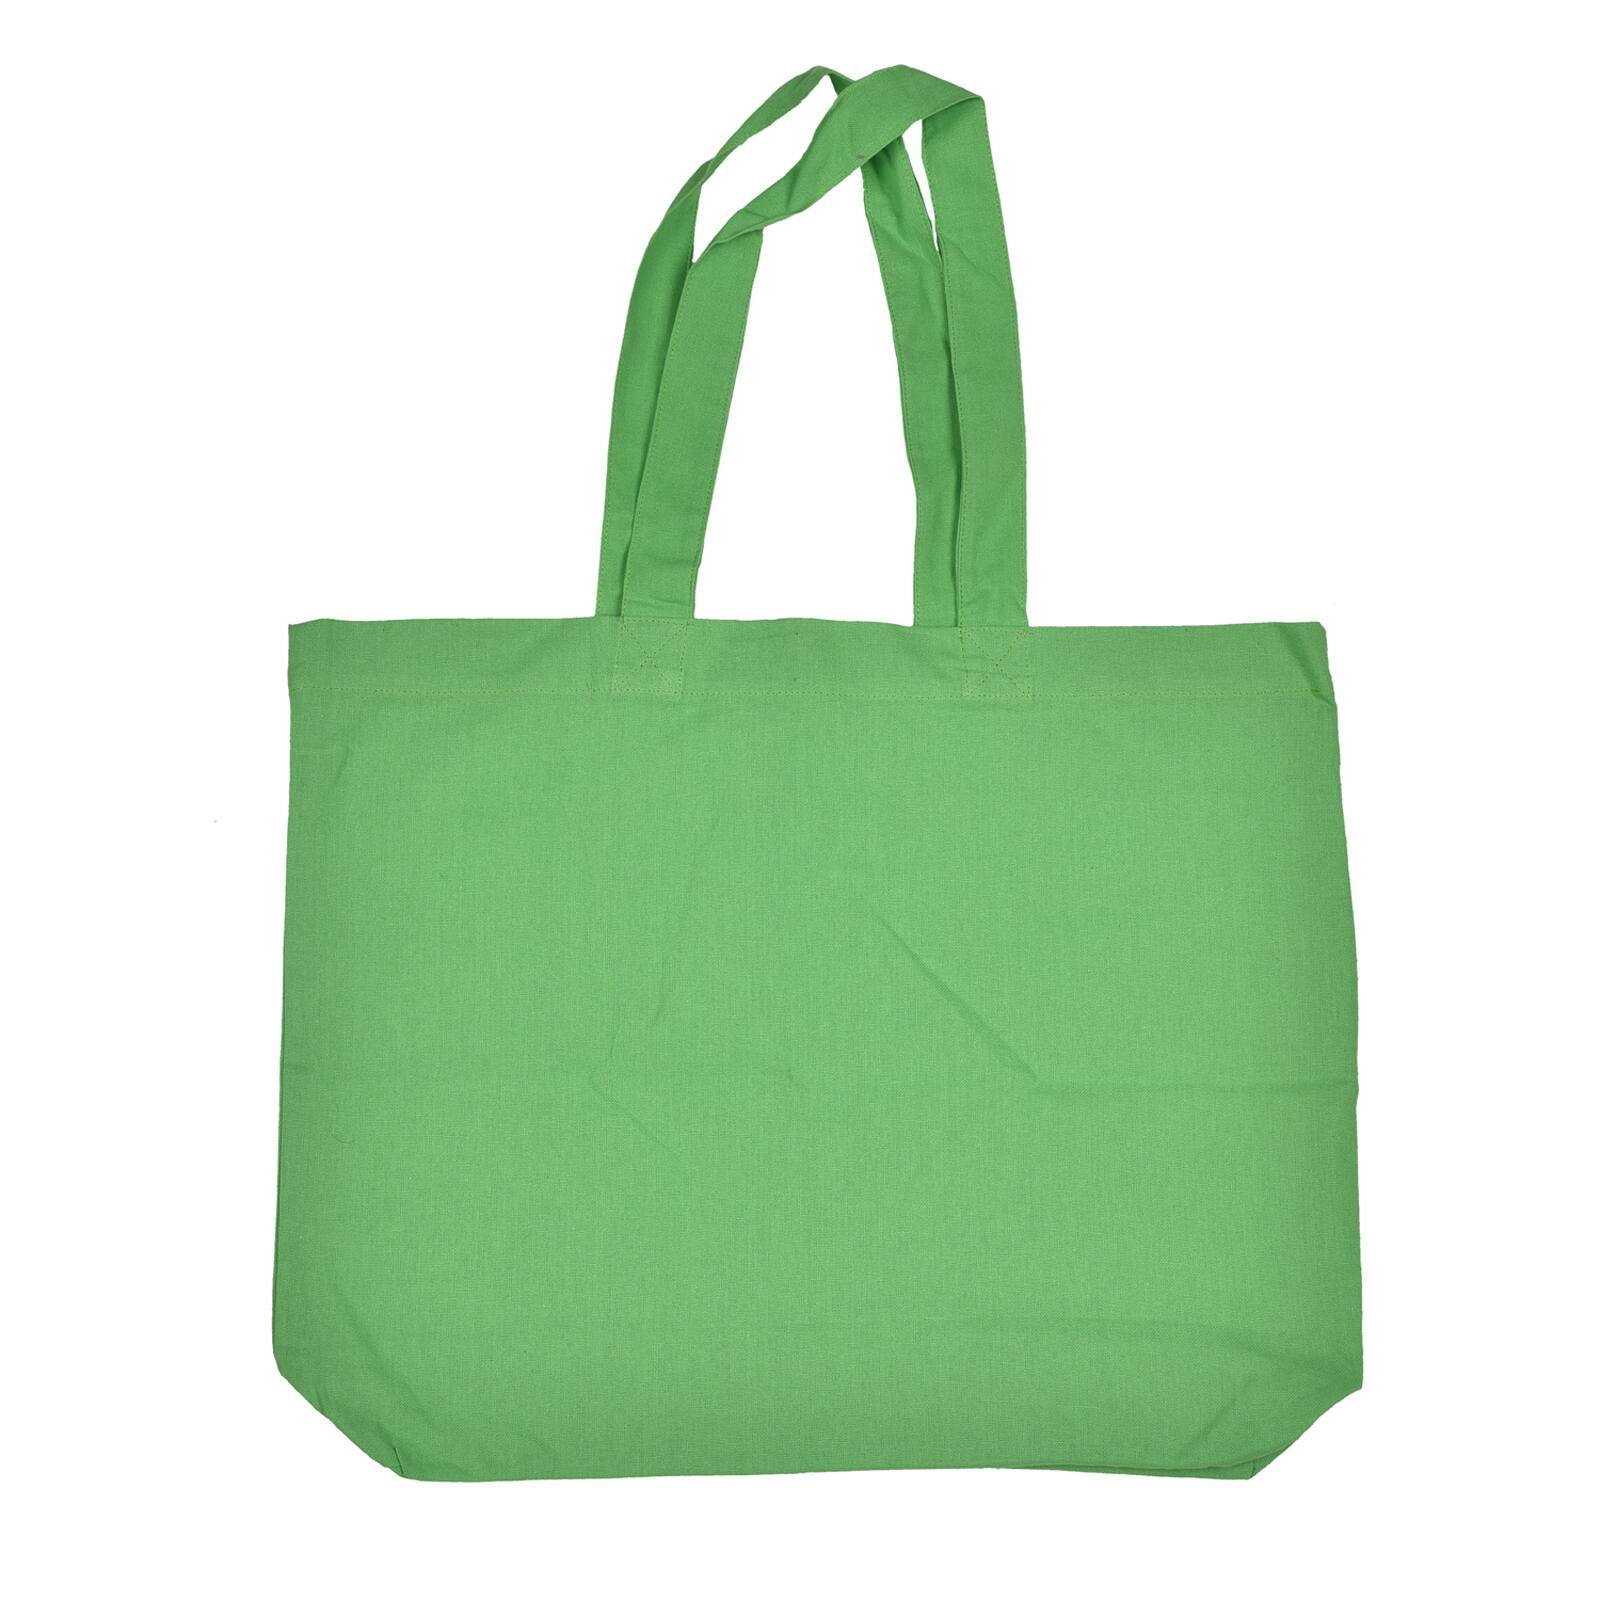 24 Pack: Canvas Tote Bag by Imagin8™ | Michaels